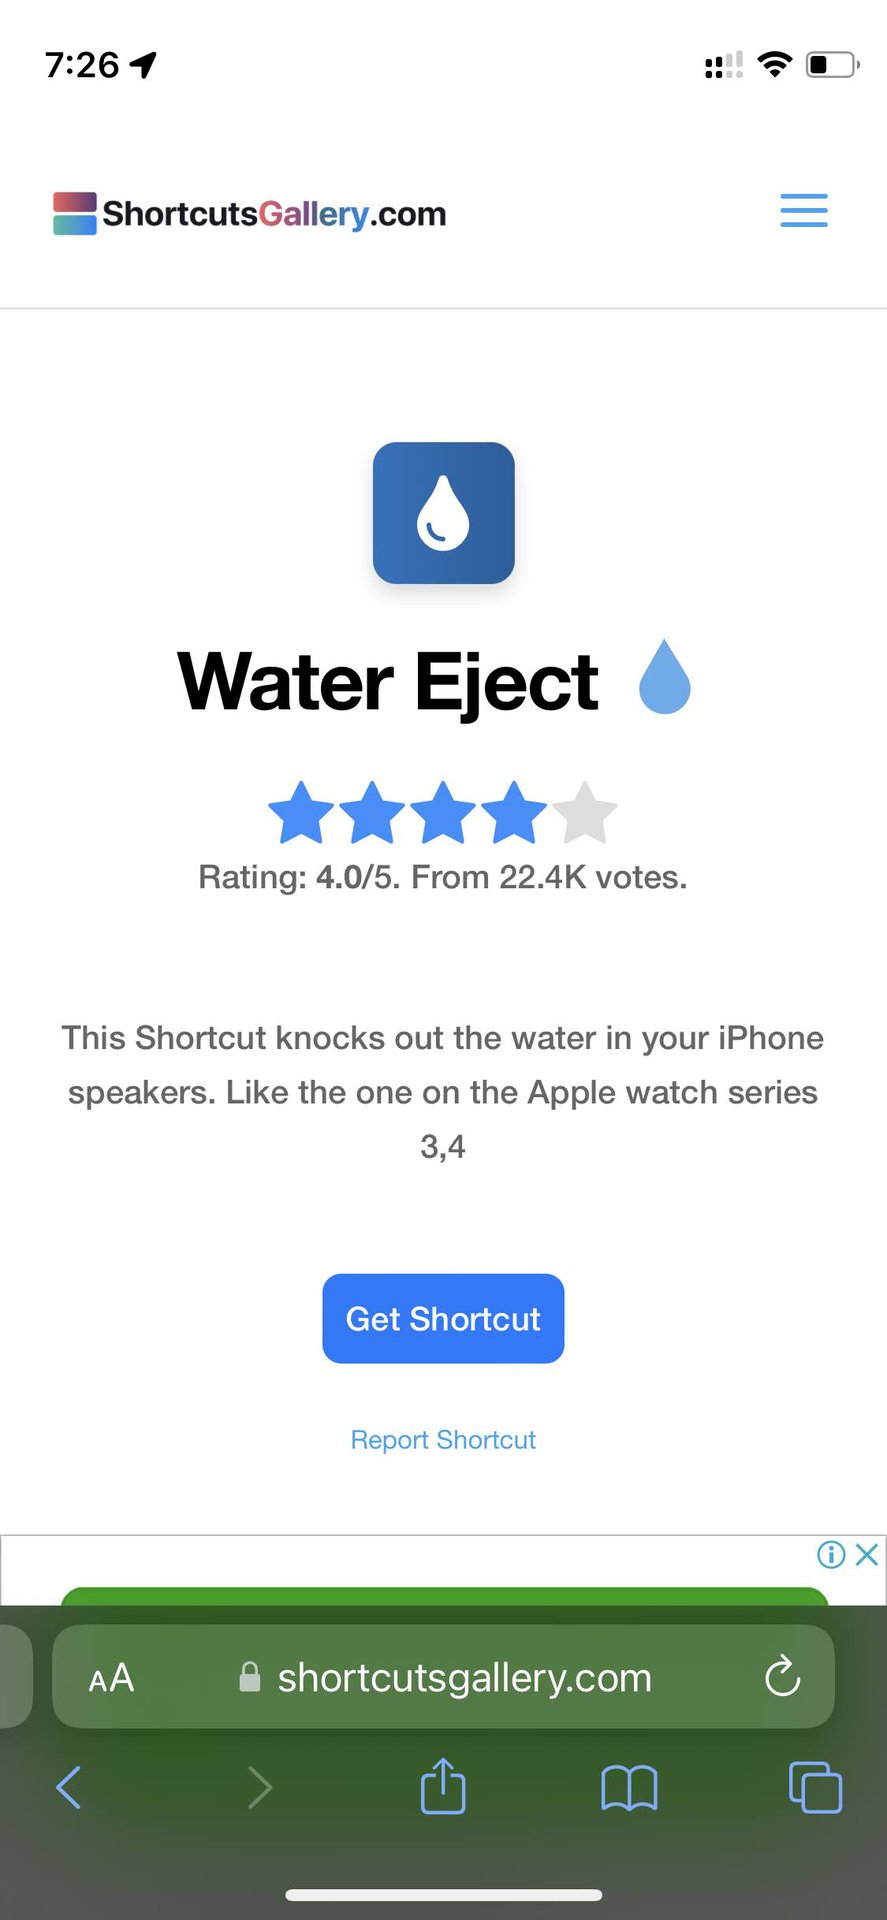 Water Eject Shortcut on iPhone 3